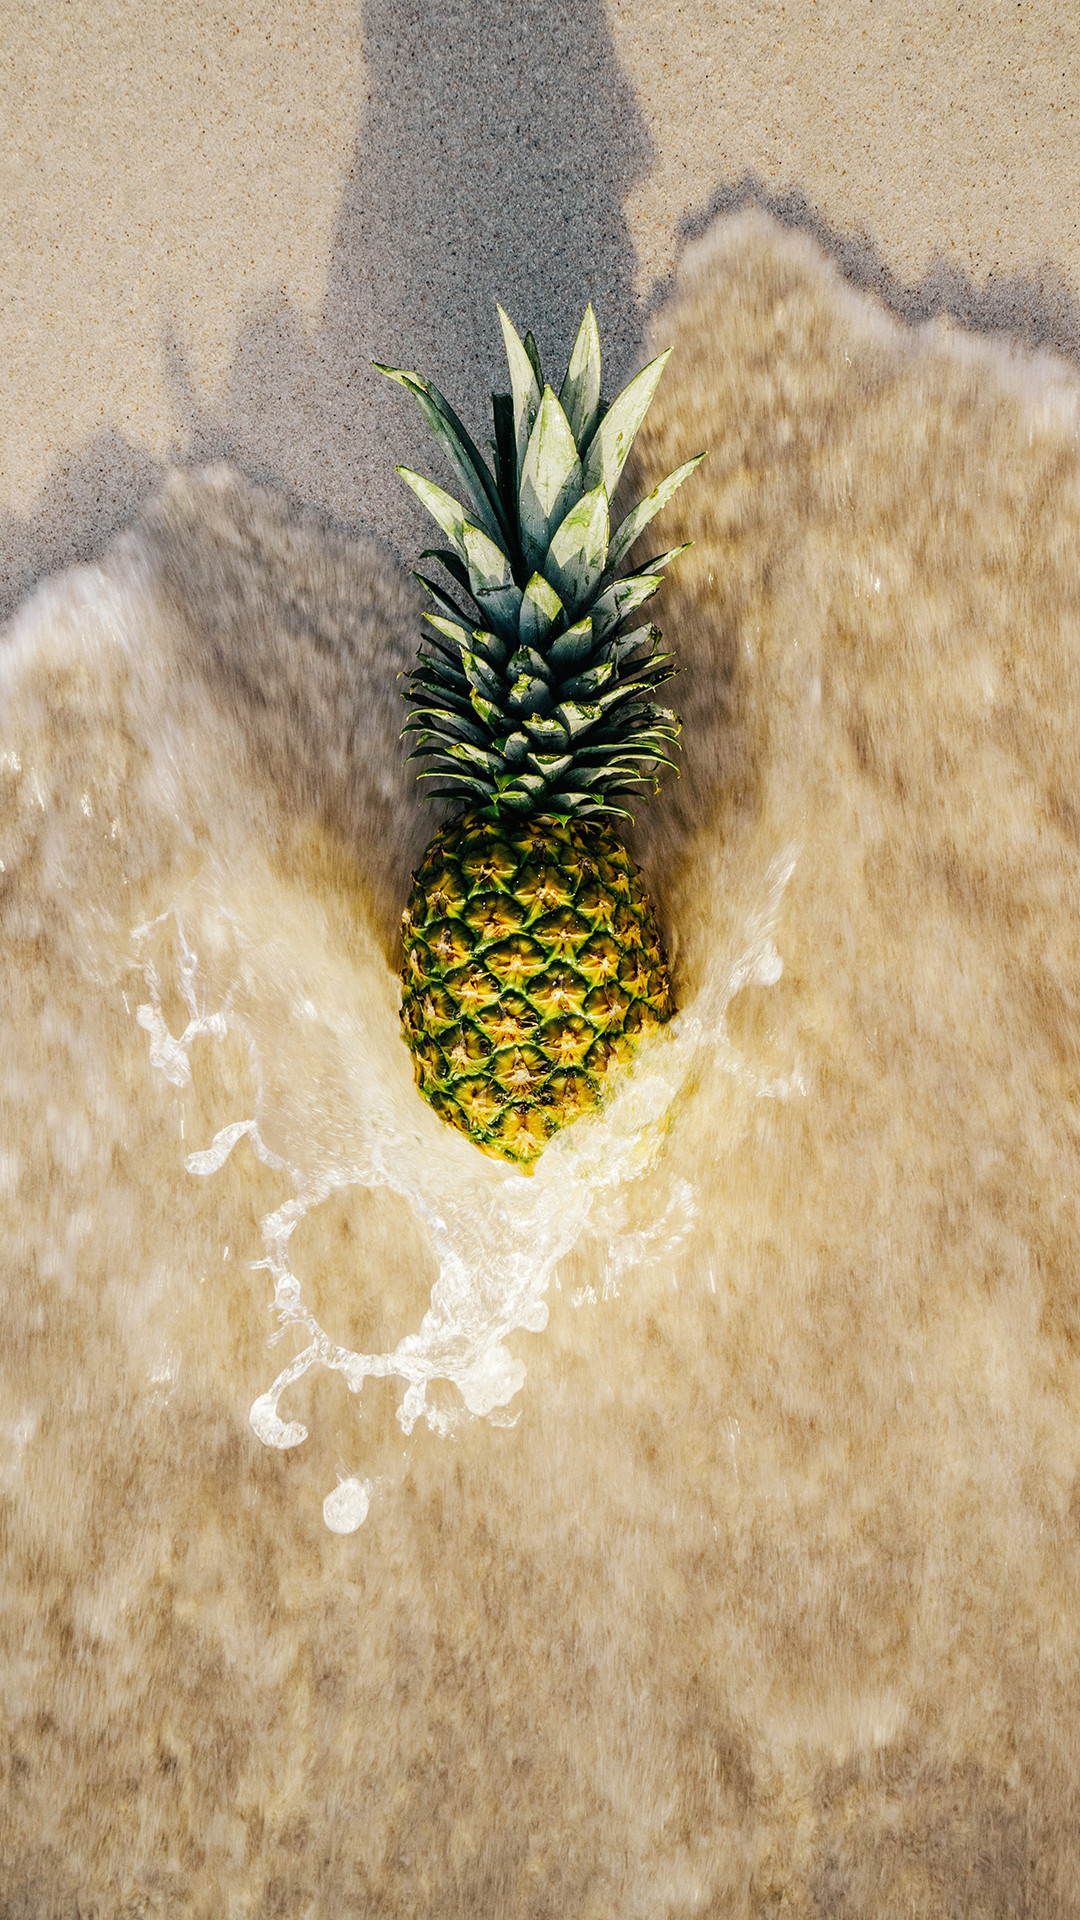 Download this rad pineapple wallpaper for your iPhone